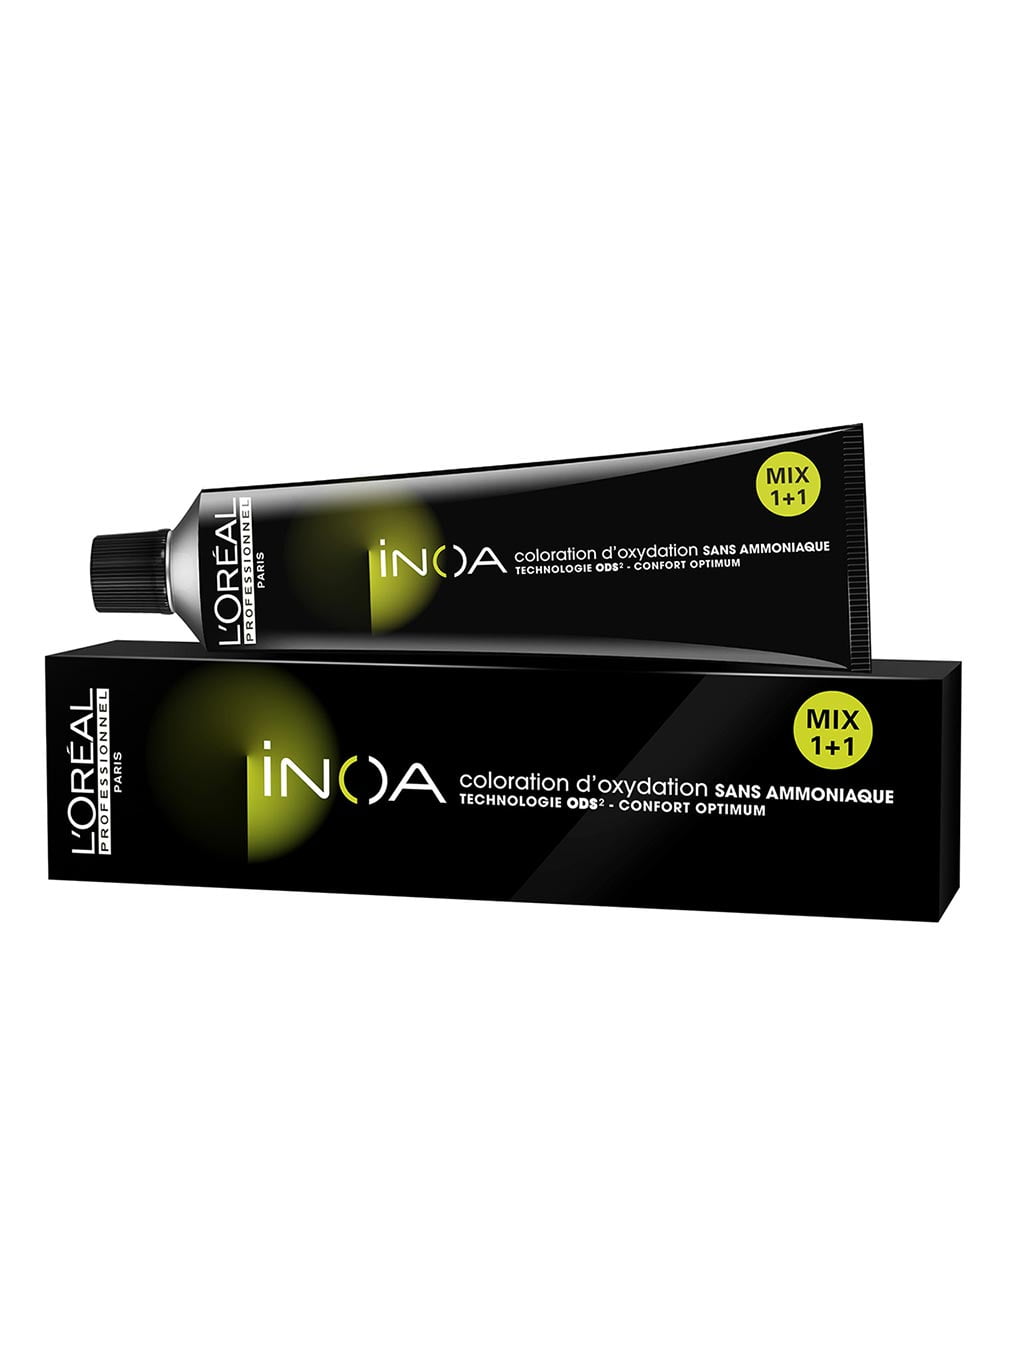 LOreal Inoa Hair Color #4,65 (European Package For /4RRv) ODS2 No  Ammonia 2 Ounce 